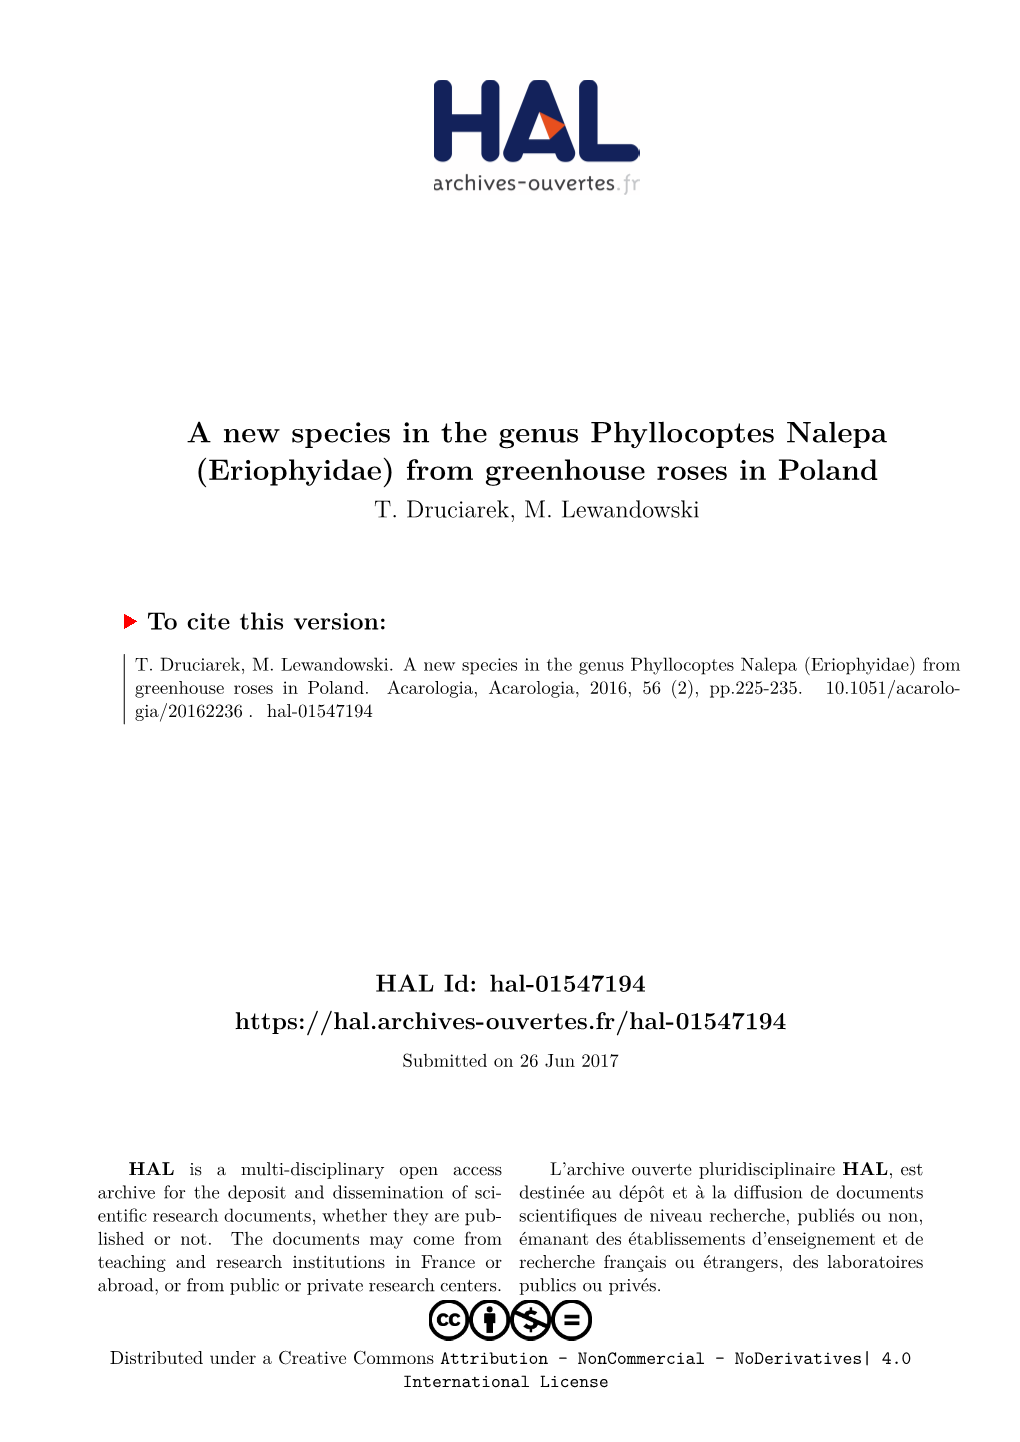 A New Species in the Genus Phyllocoptes Nalepa (Eriophyidae) from Greenhouse Roses in Poland T